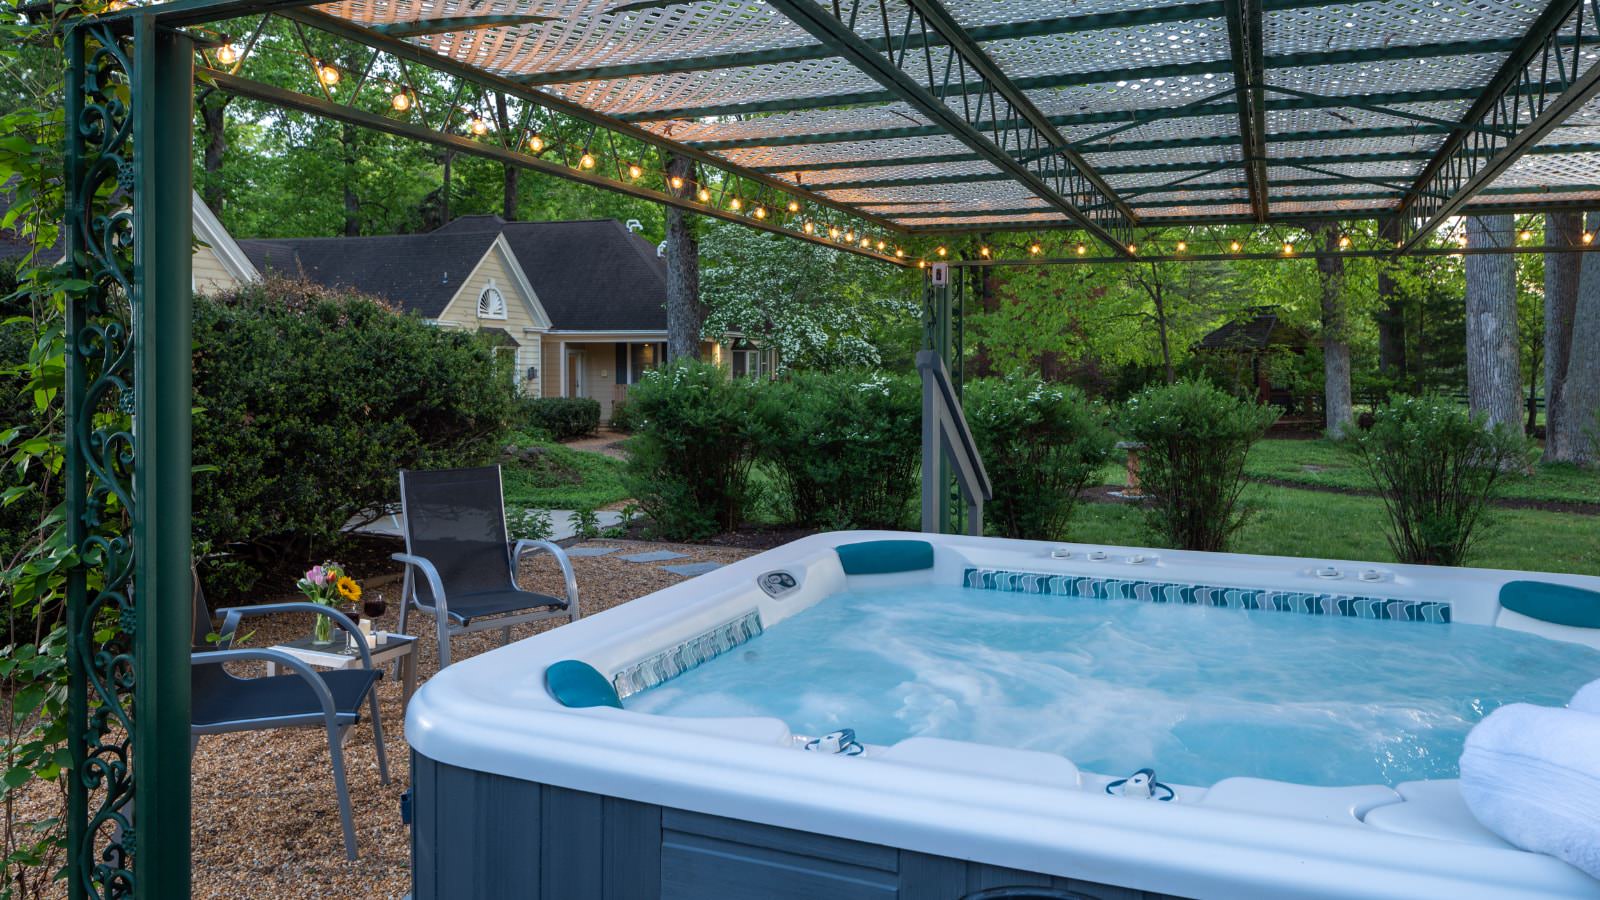 Outdoor hot tub under a green wrought iron covering decorated with lights and two patio chairs and a small table near by with green bushes in the background